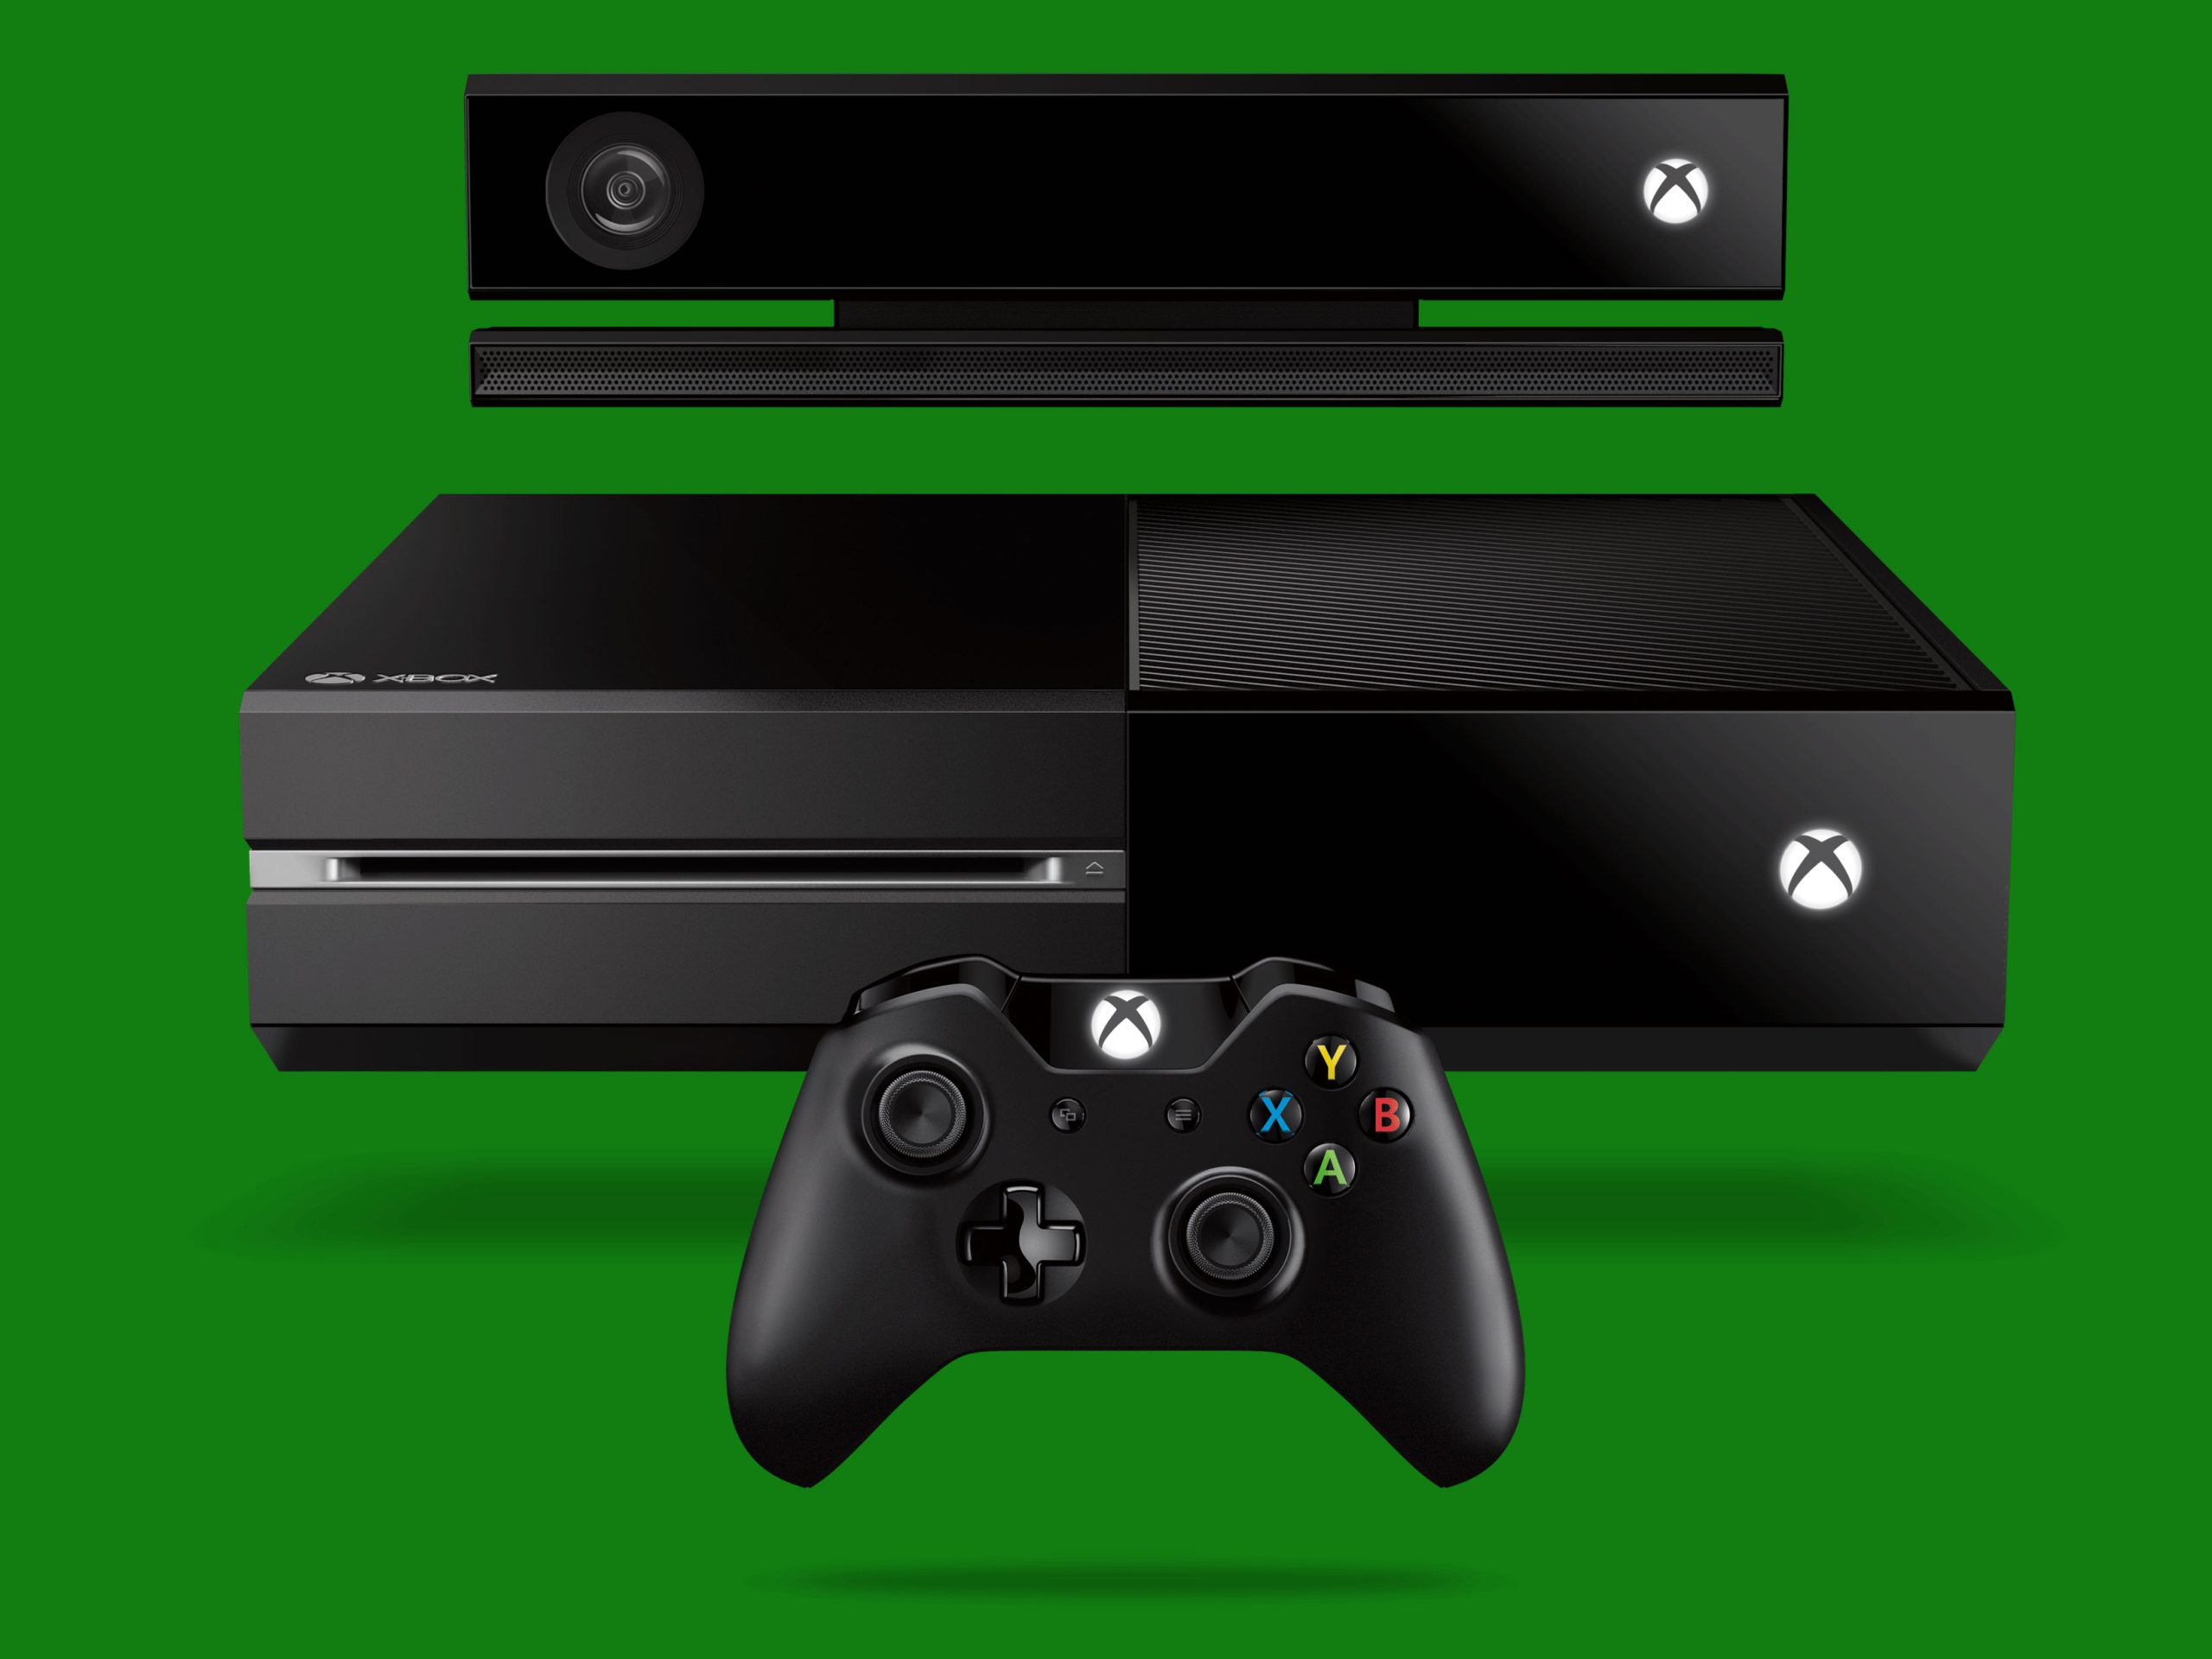 E3 2015: Xbox One becoming backwards compatible with Xbox 360 games